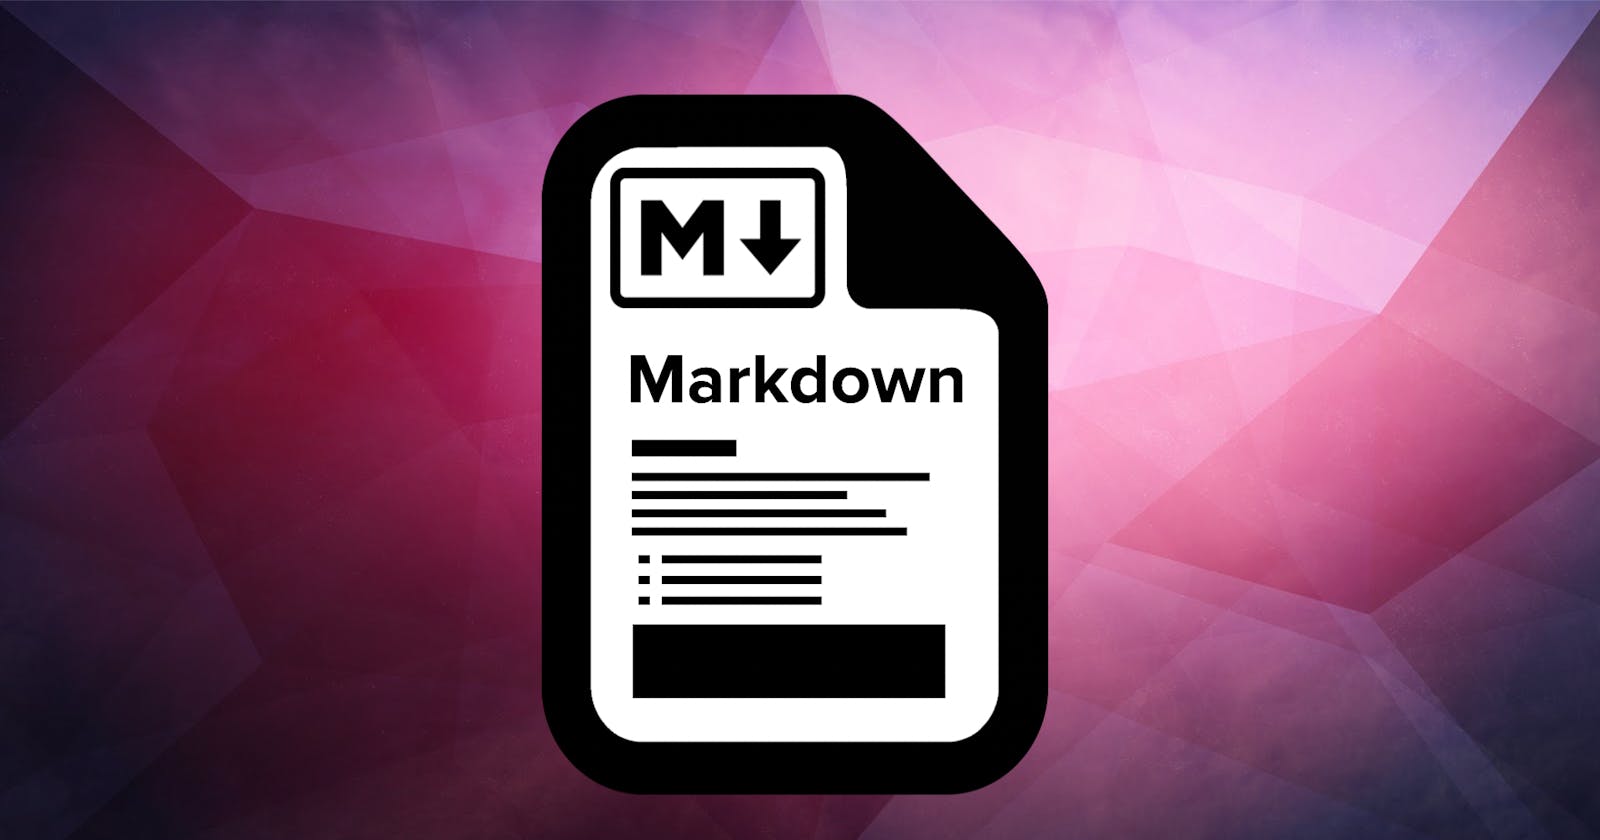 Let's talk about Markdown for your projects 🚀